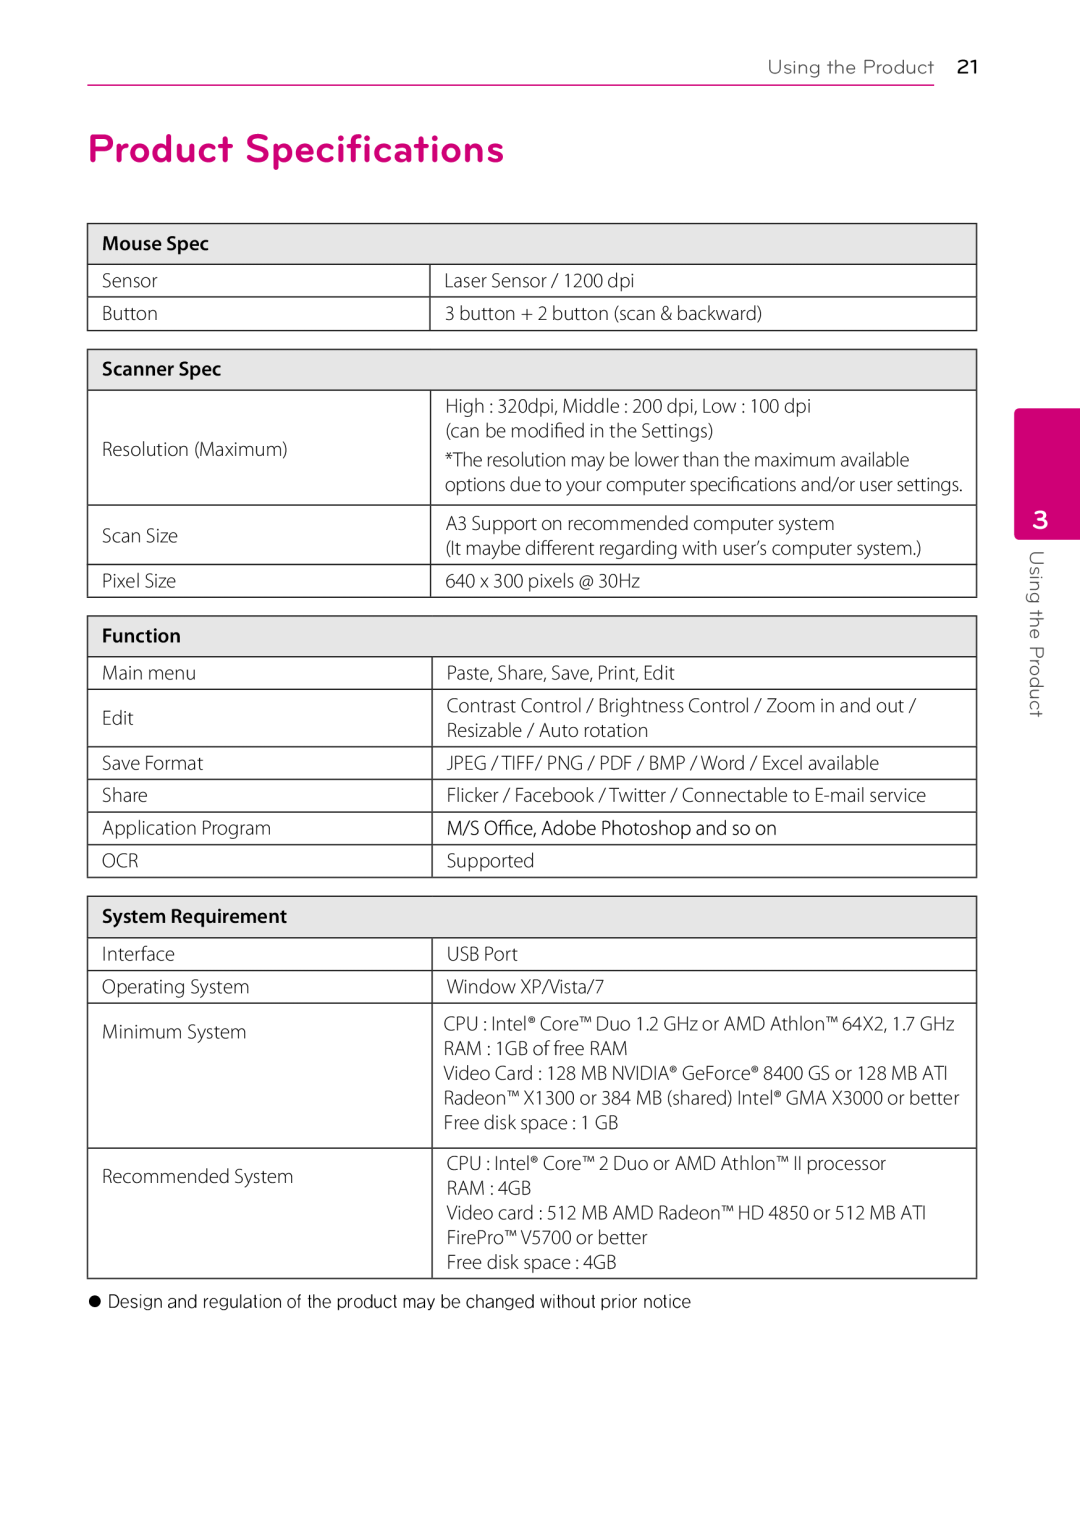 LG Electronics LSM-100 Product Speciﬁcations, Using the Product, Mouse Spec, Scanner Spec, Function, System Requirement 